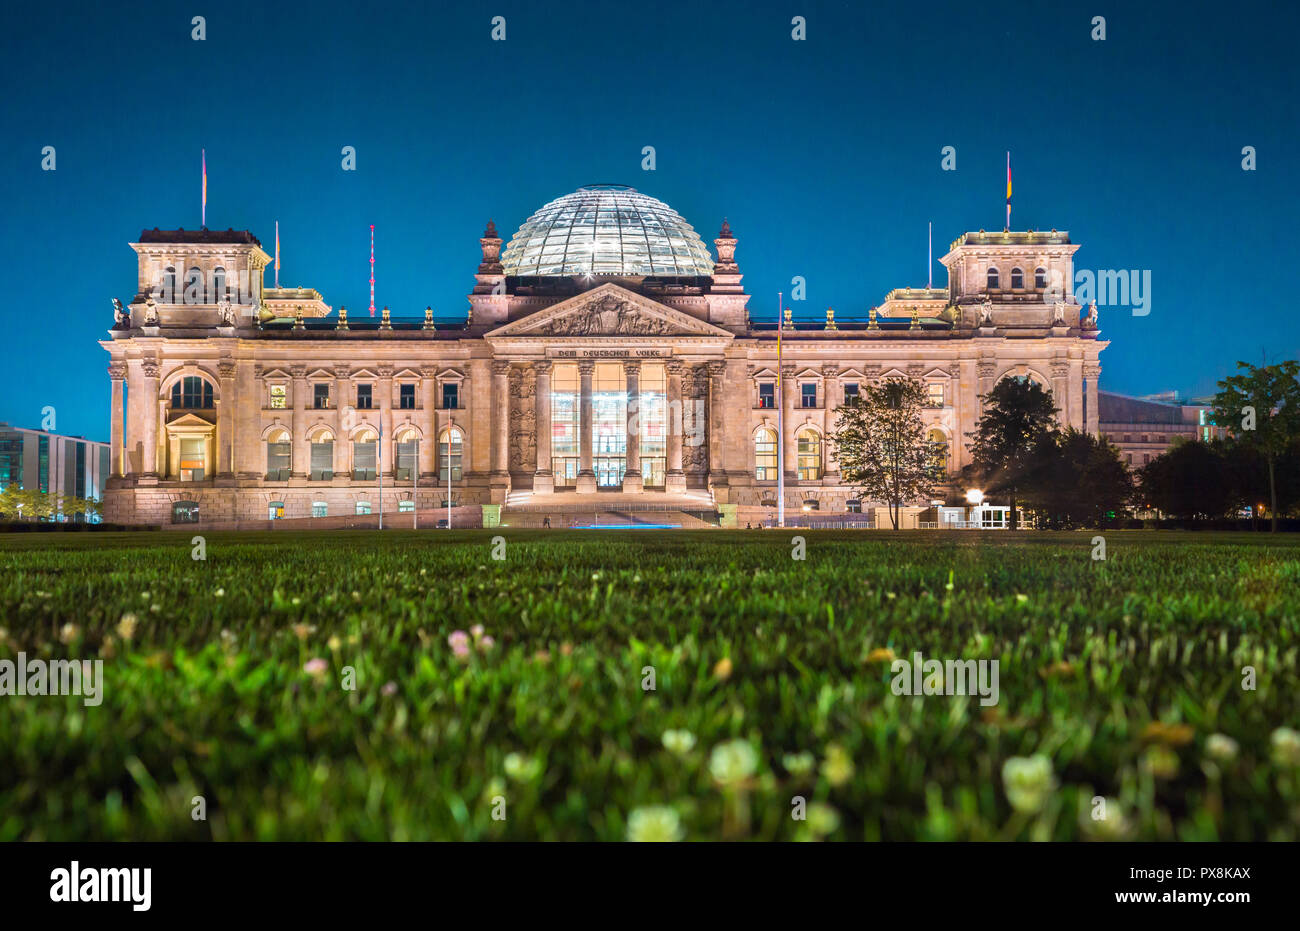 Classic twilight view of famous Berlin Reichstag building during blue hour at dusk, central Berlin Mitte, Germany Stock Photo